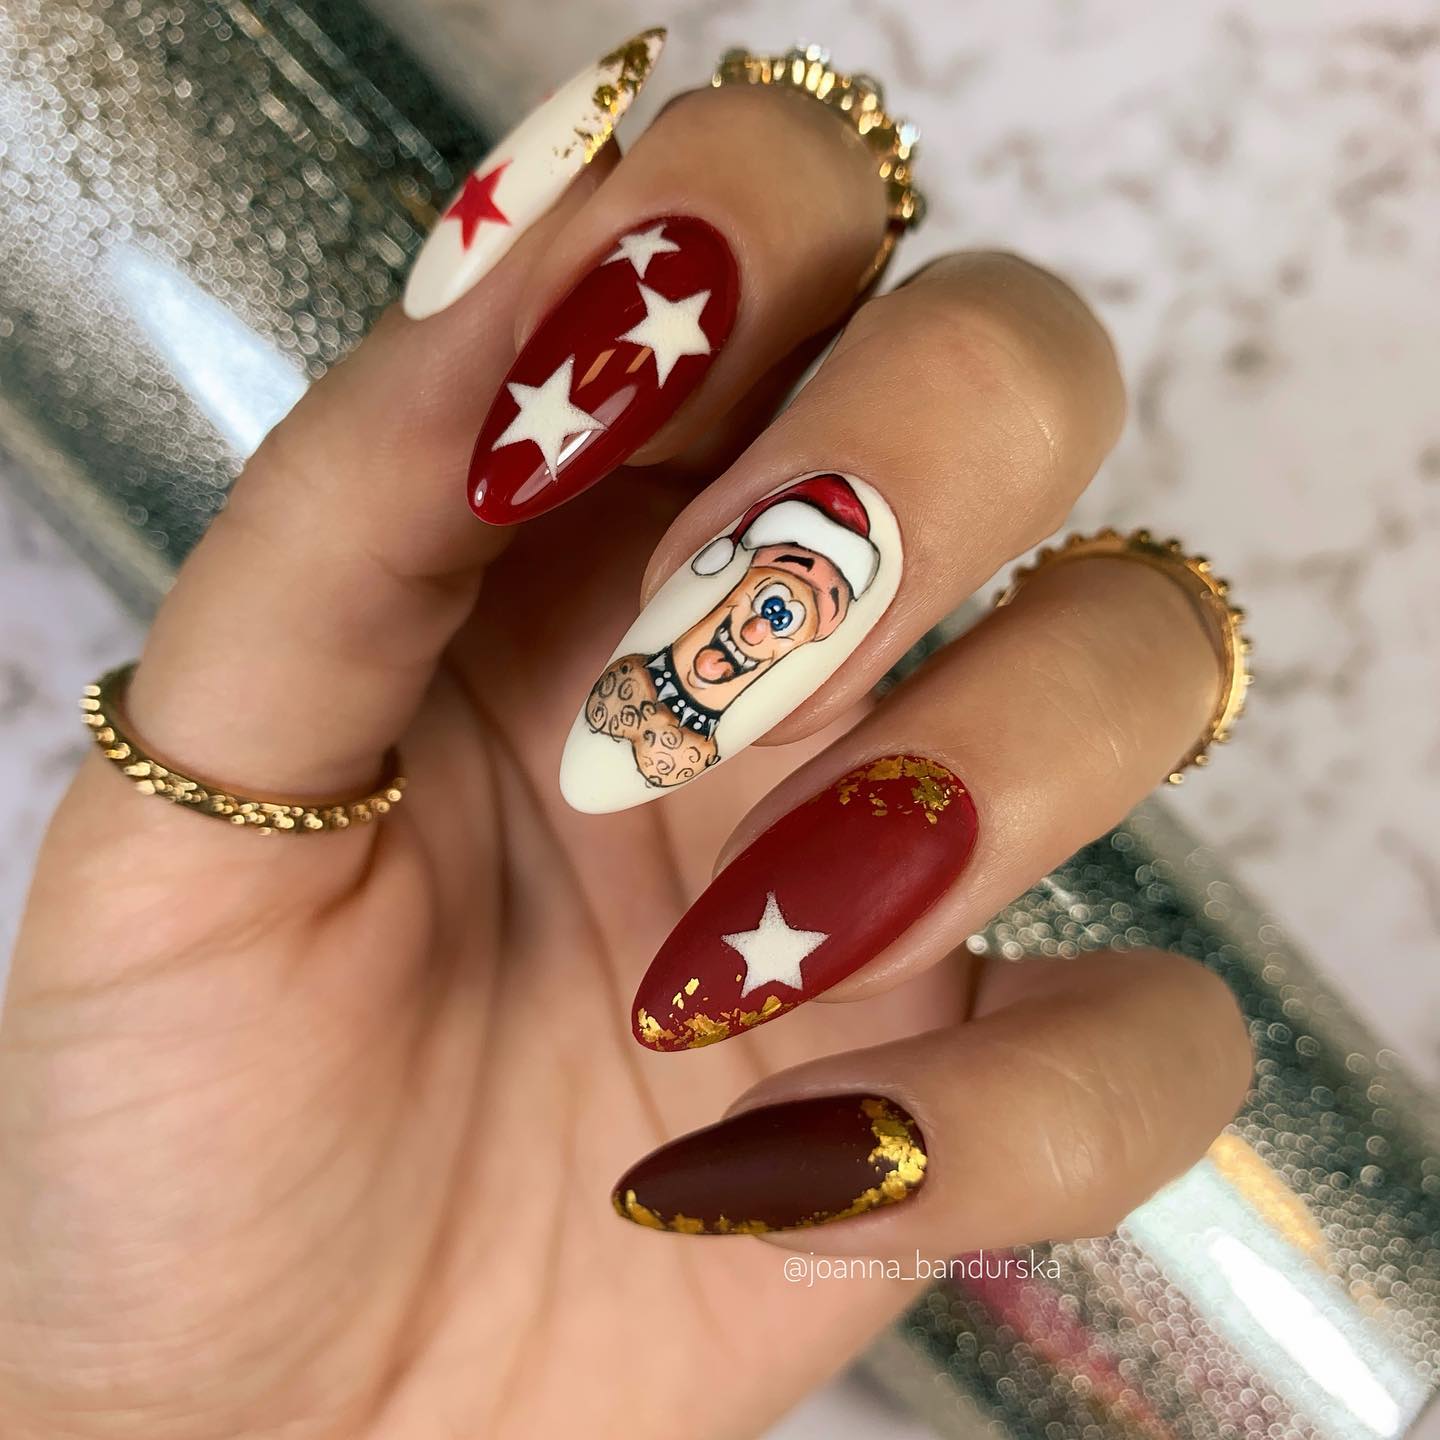 Christmas is a one of the greatest times of a year, so why not celebrating it with your nails? A penis nail art can take your nails to a different level.